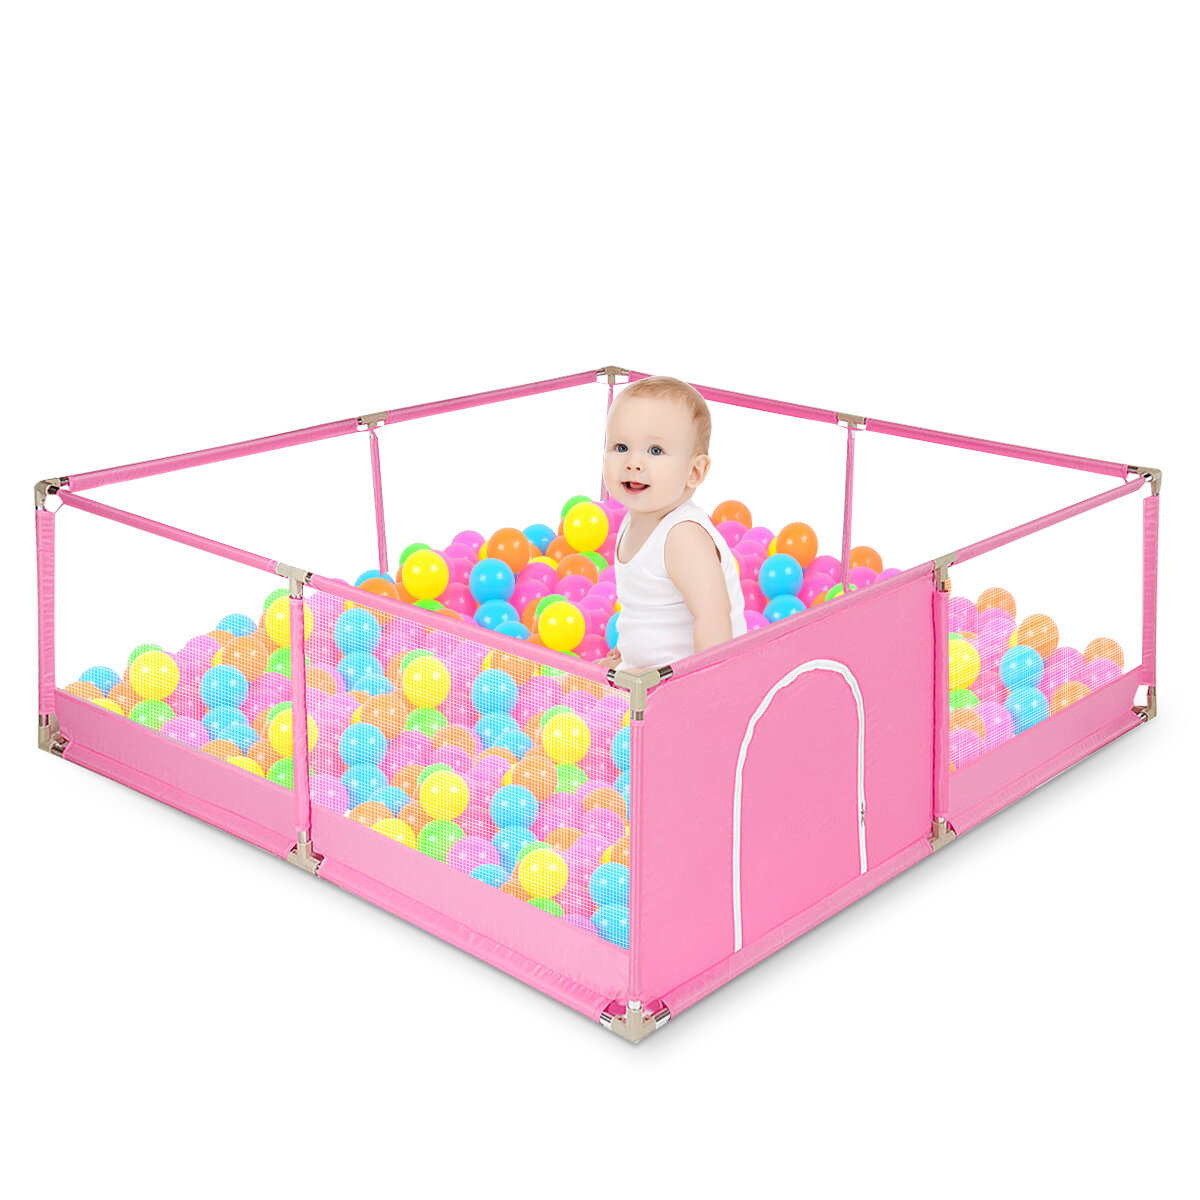 Baby Playpen Safety Kids Tent Children's Ocean Ball Pool Large Area Kids Playground for 0-6 Years Old